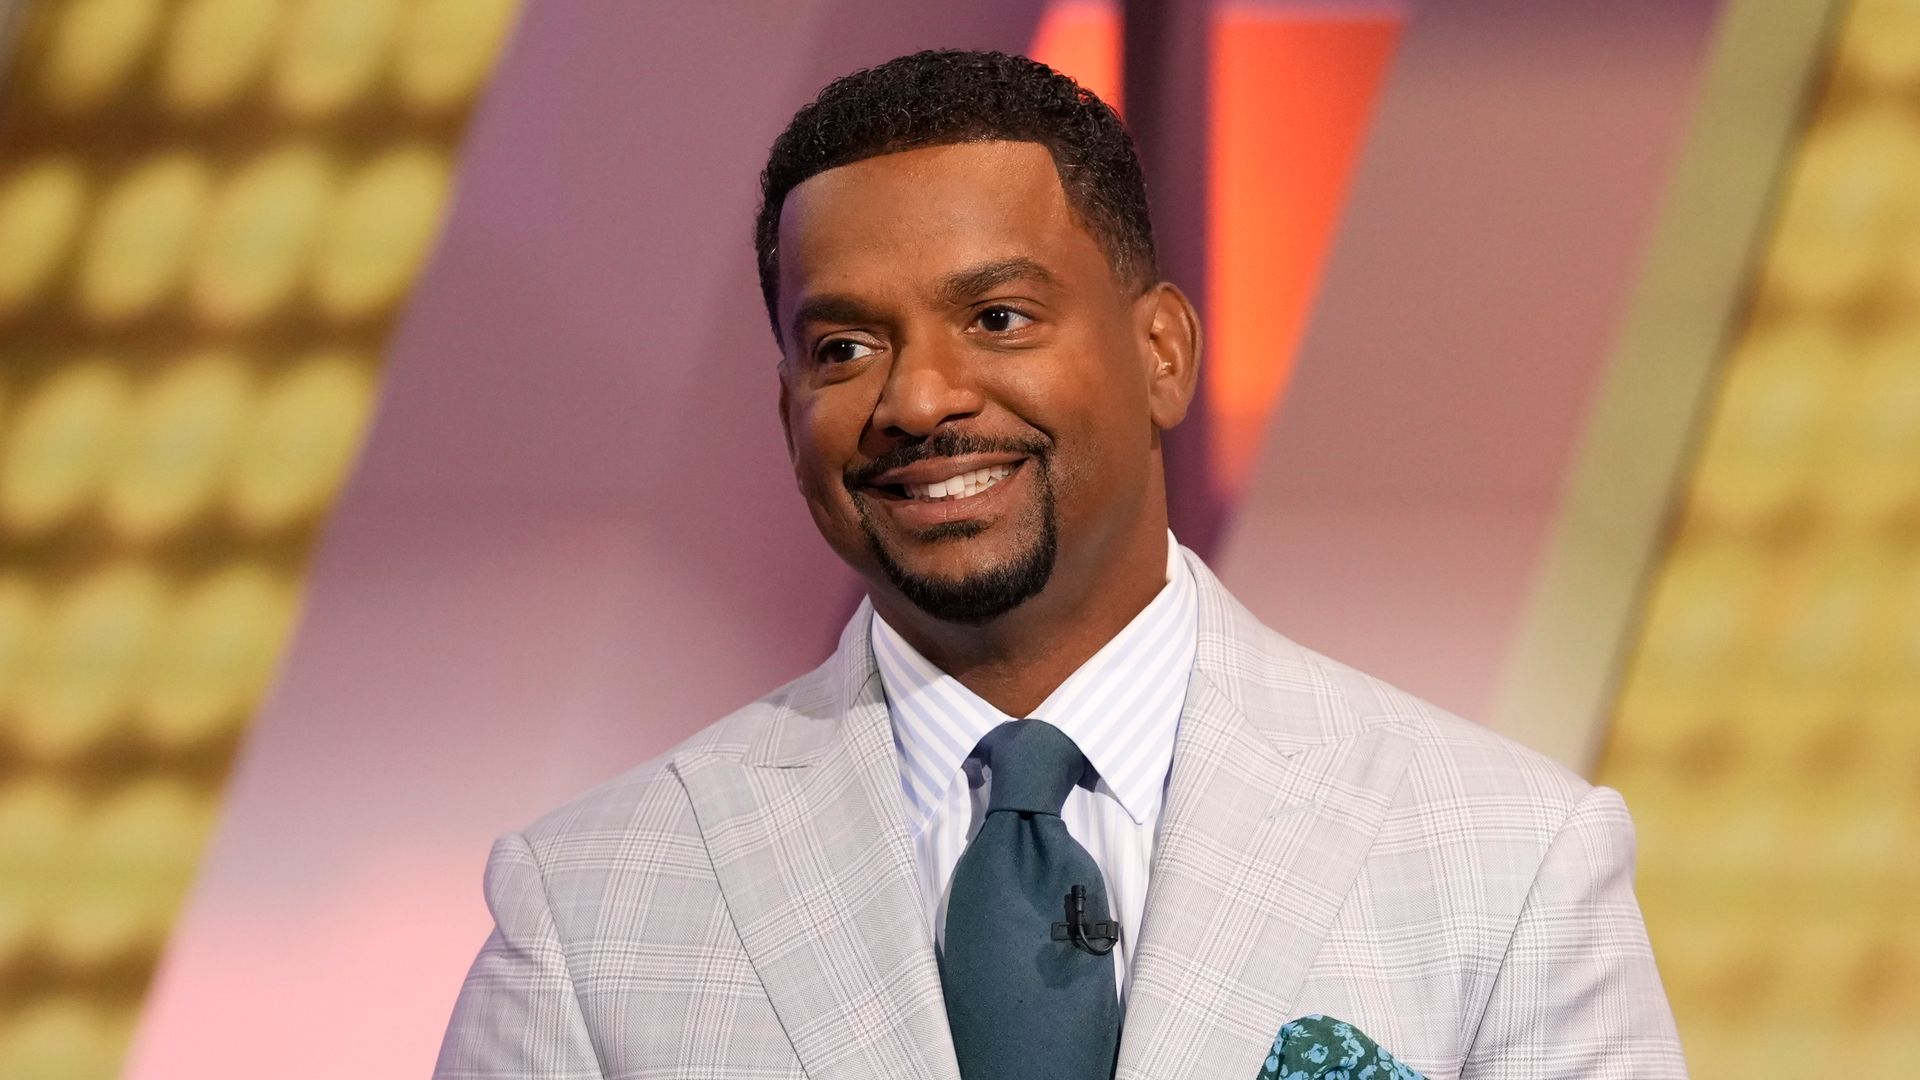 Alfonso Ribeiro reveals changes made in family home after son's health scare